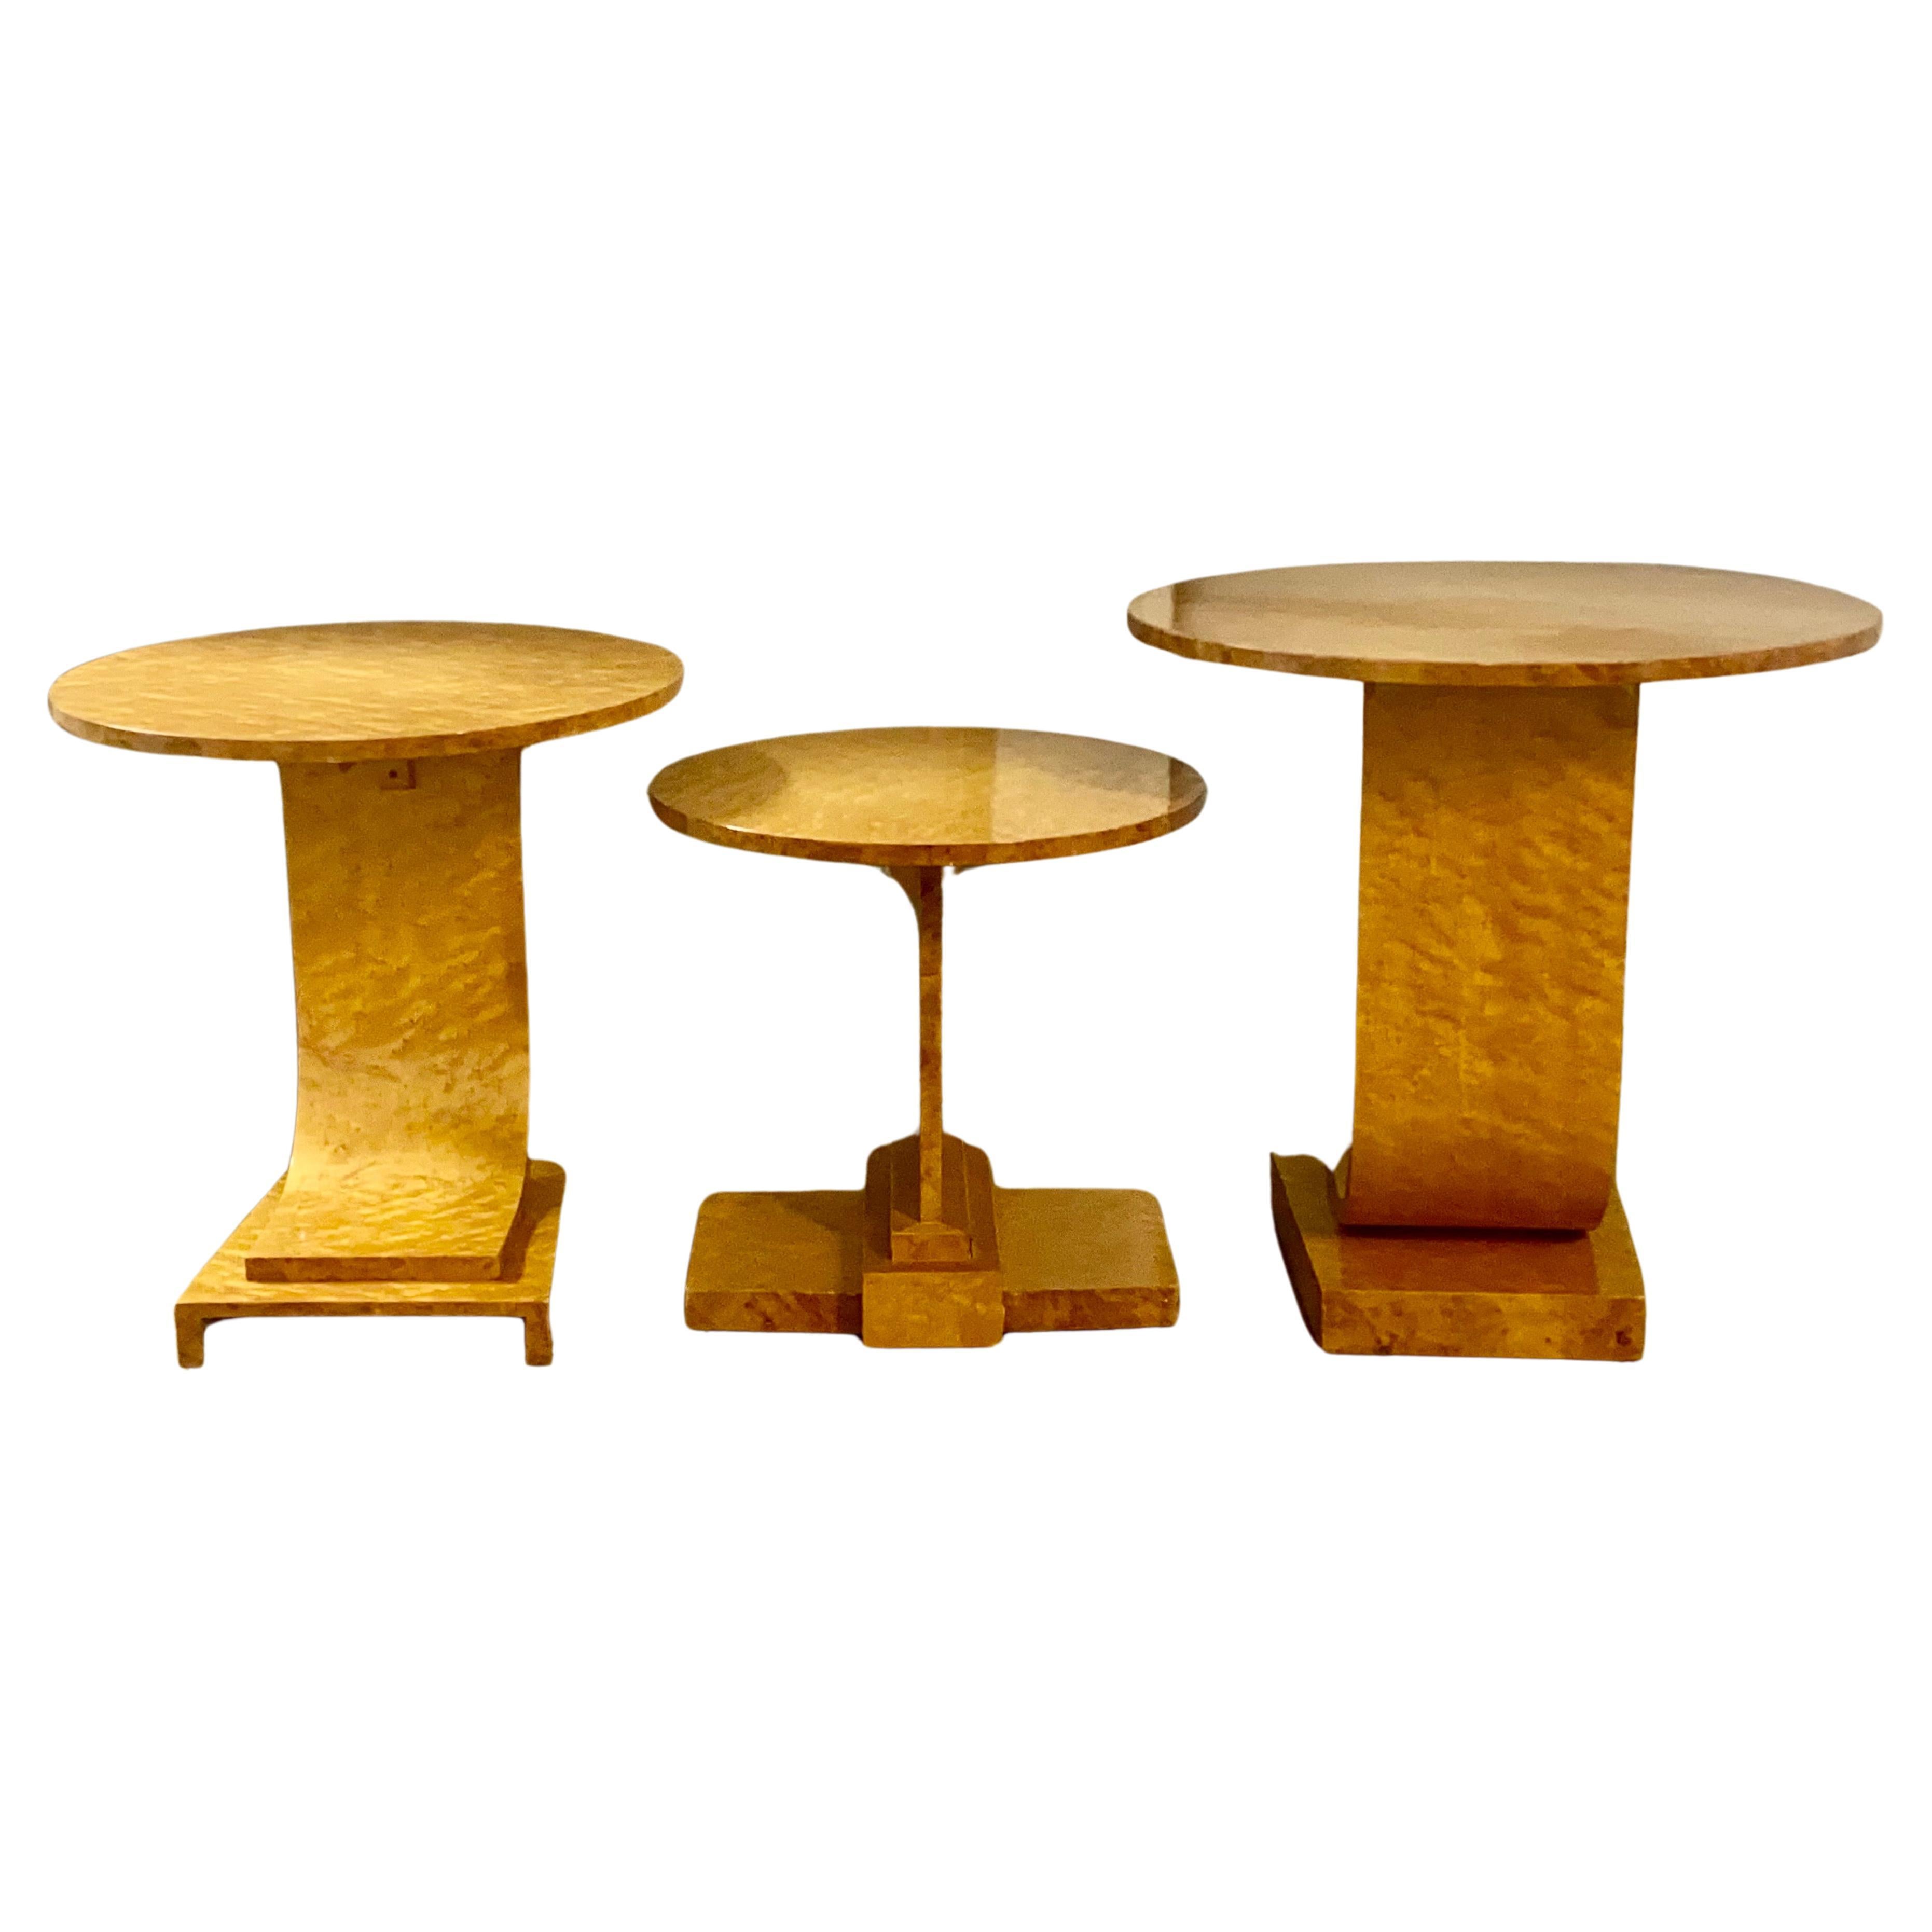 A Rare Art Deco Blonde Birds Eye Maple J Nest of Tables by Epstein Circa 1930 For Sale 6